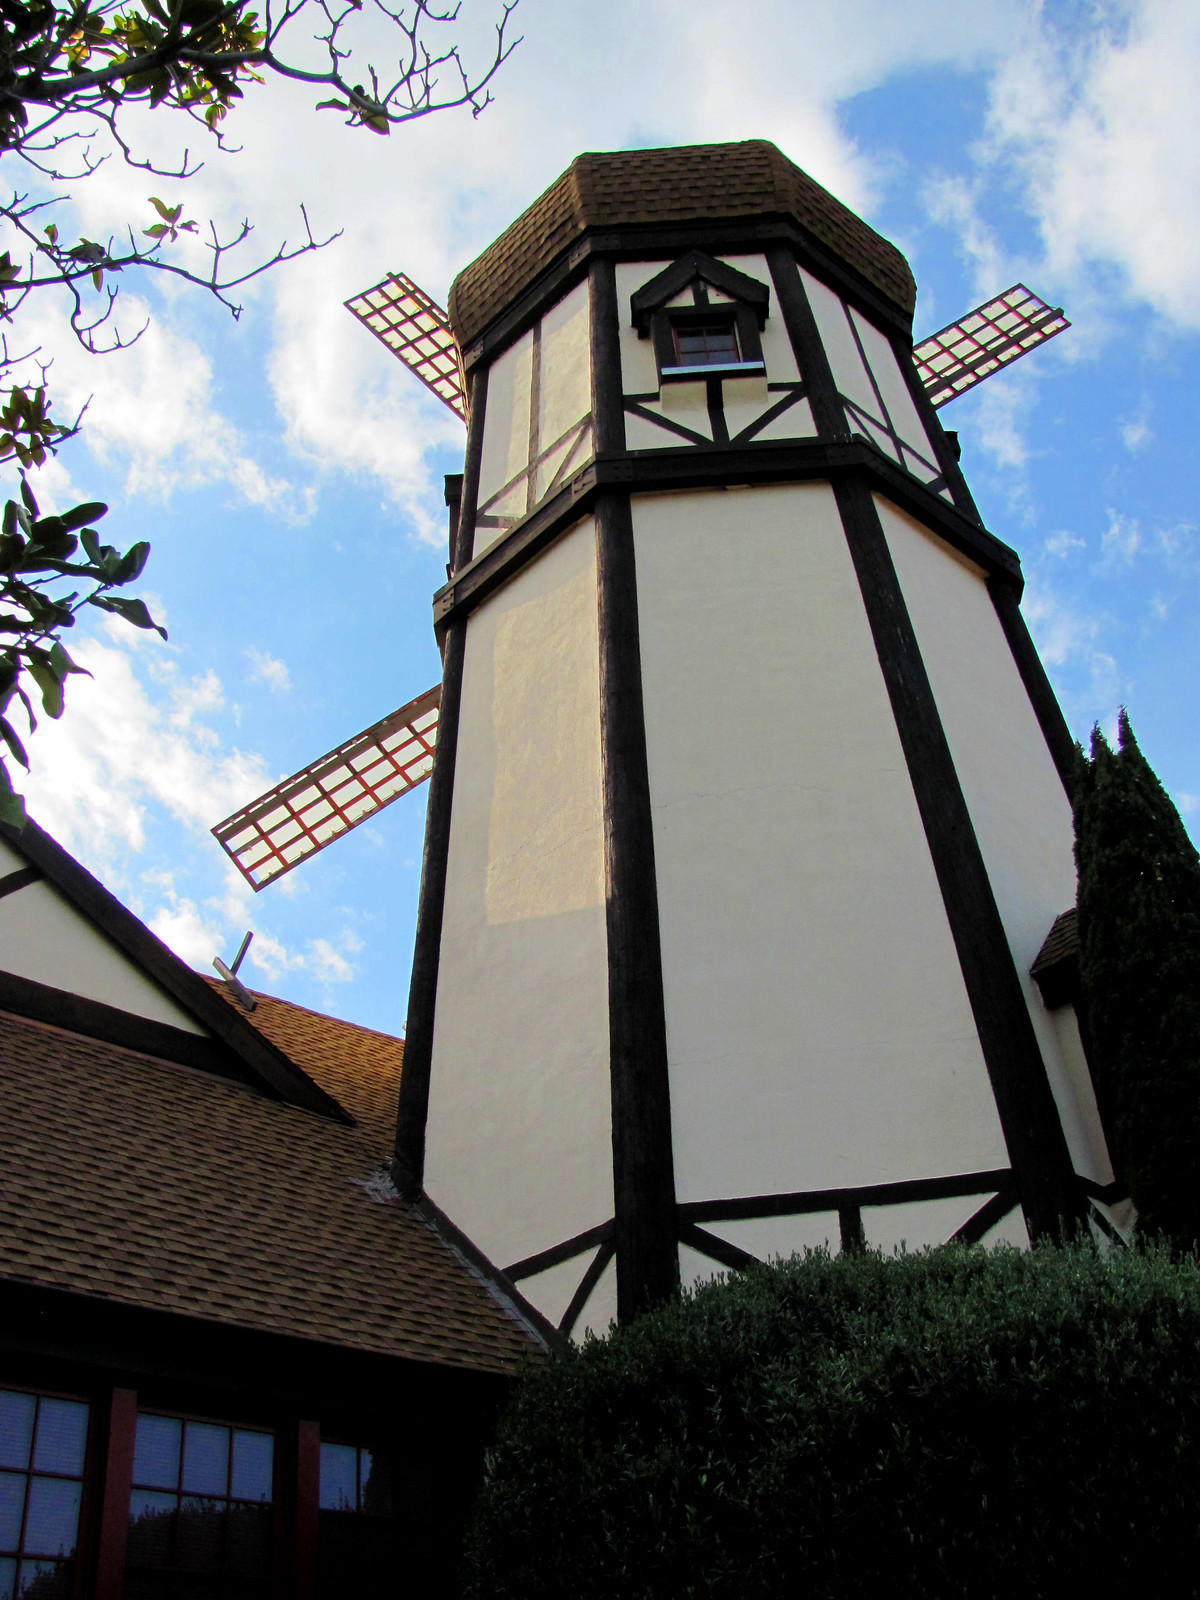 Shot of a Danish style wooden windmill painted white and brown from the ground. The windmill is a Pea Soup Andersen's, a fun pit stop on South Hwy 33 on a Los Angeles to San Francisco road trip